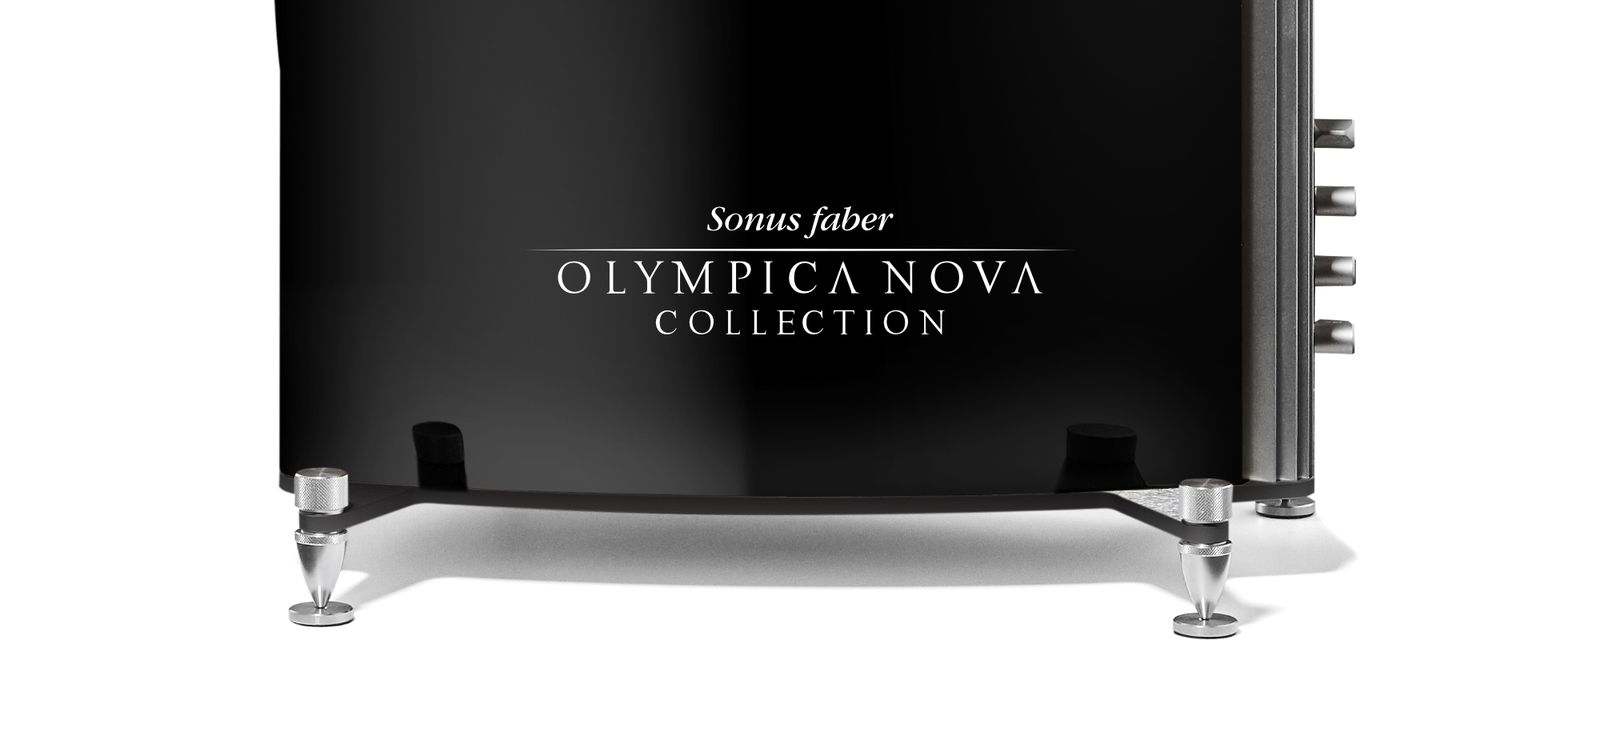 Sonus faber's Olympica Nova Collection is now available in a beautiful piano black finish